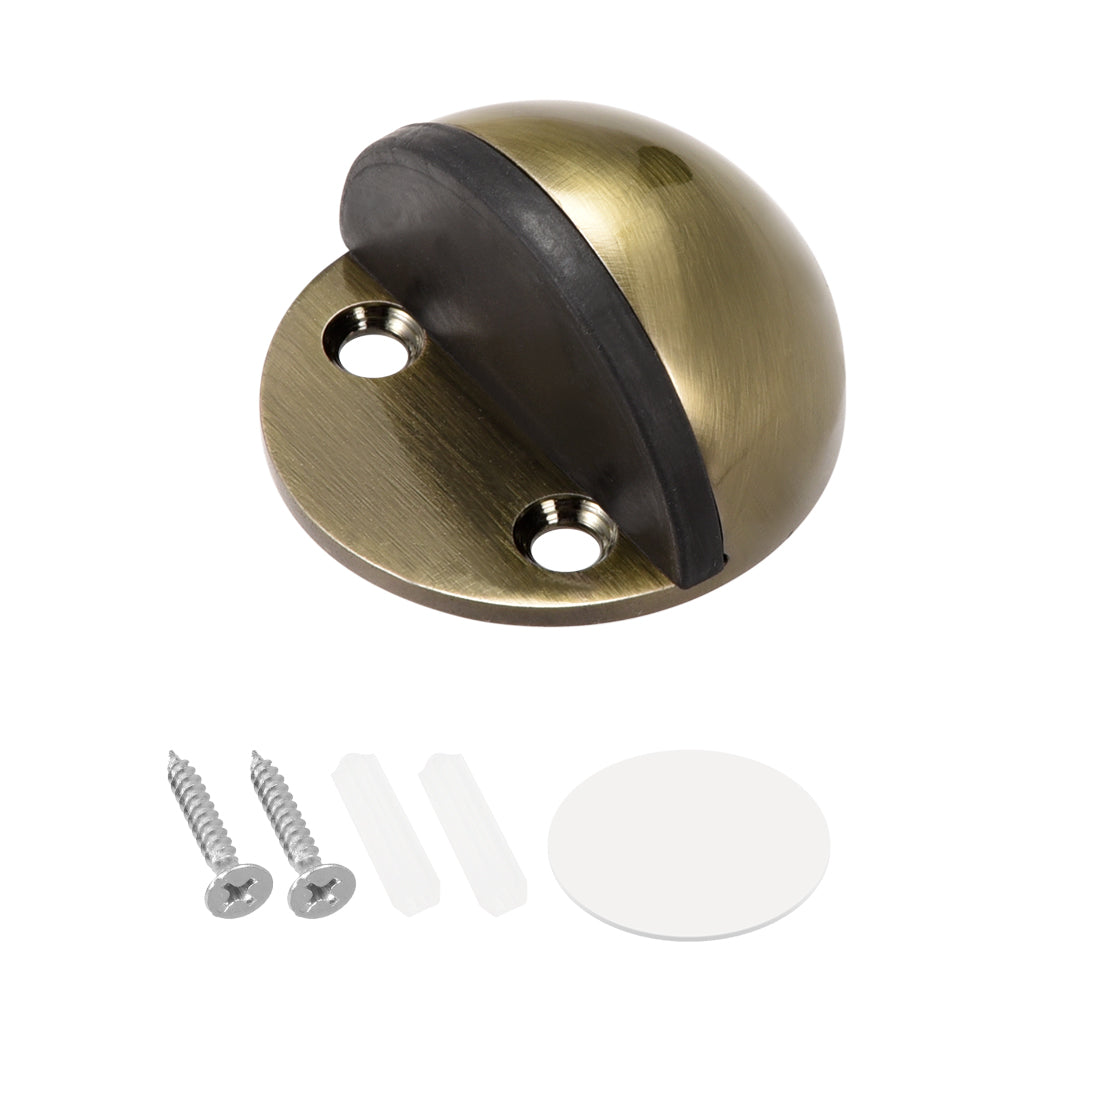 uxcell Uxcell Stainless Steel Floor Door Stopper with Rubber Bumper Adhesive/Screw Mounted Brass Tone